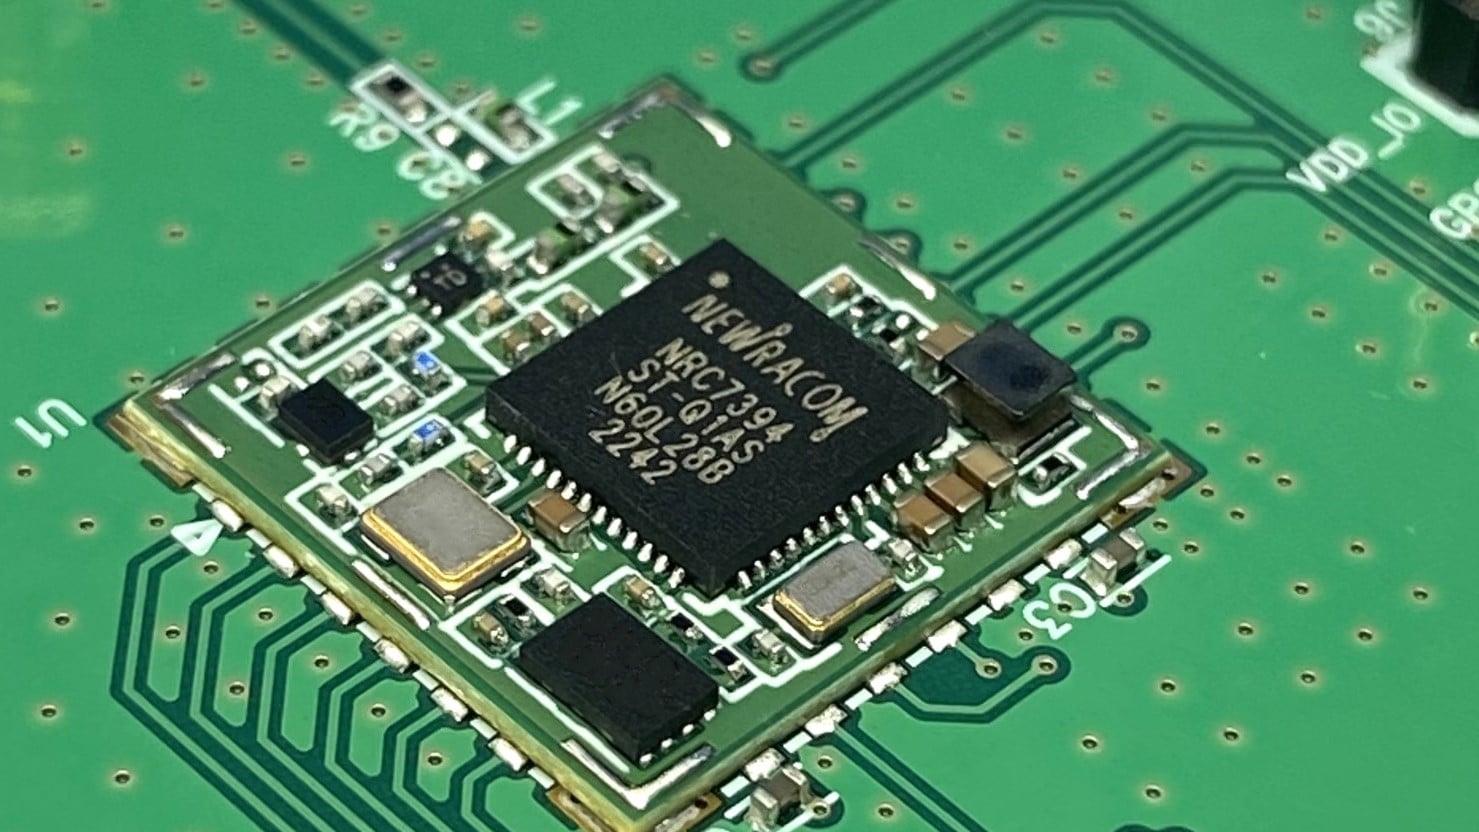 Compact, Efficient And Powerful Wi-Fi HaLow System On Chip